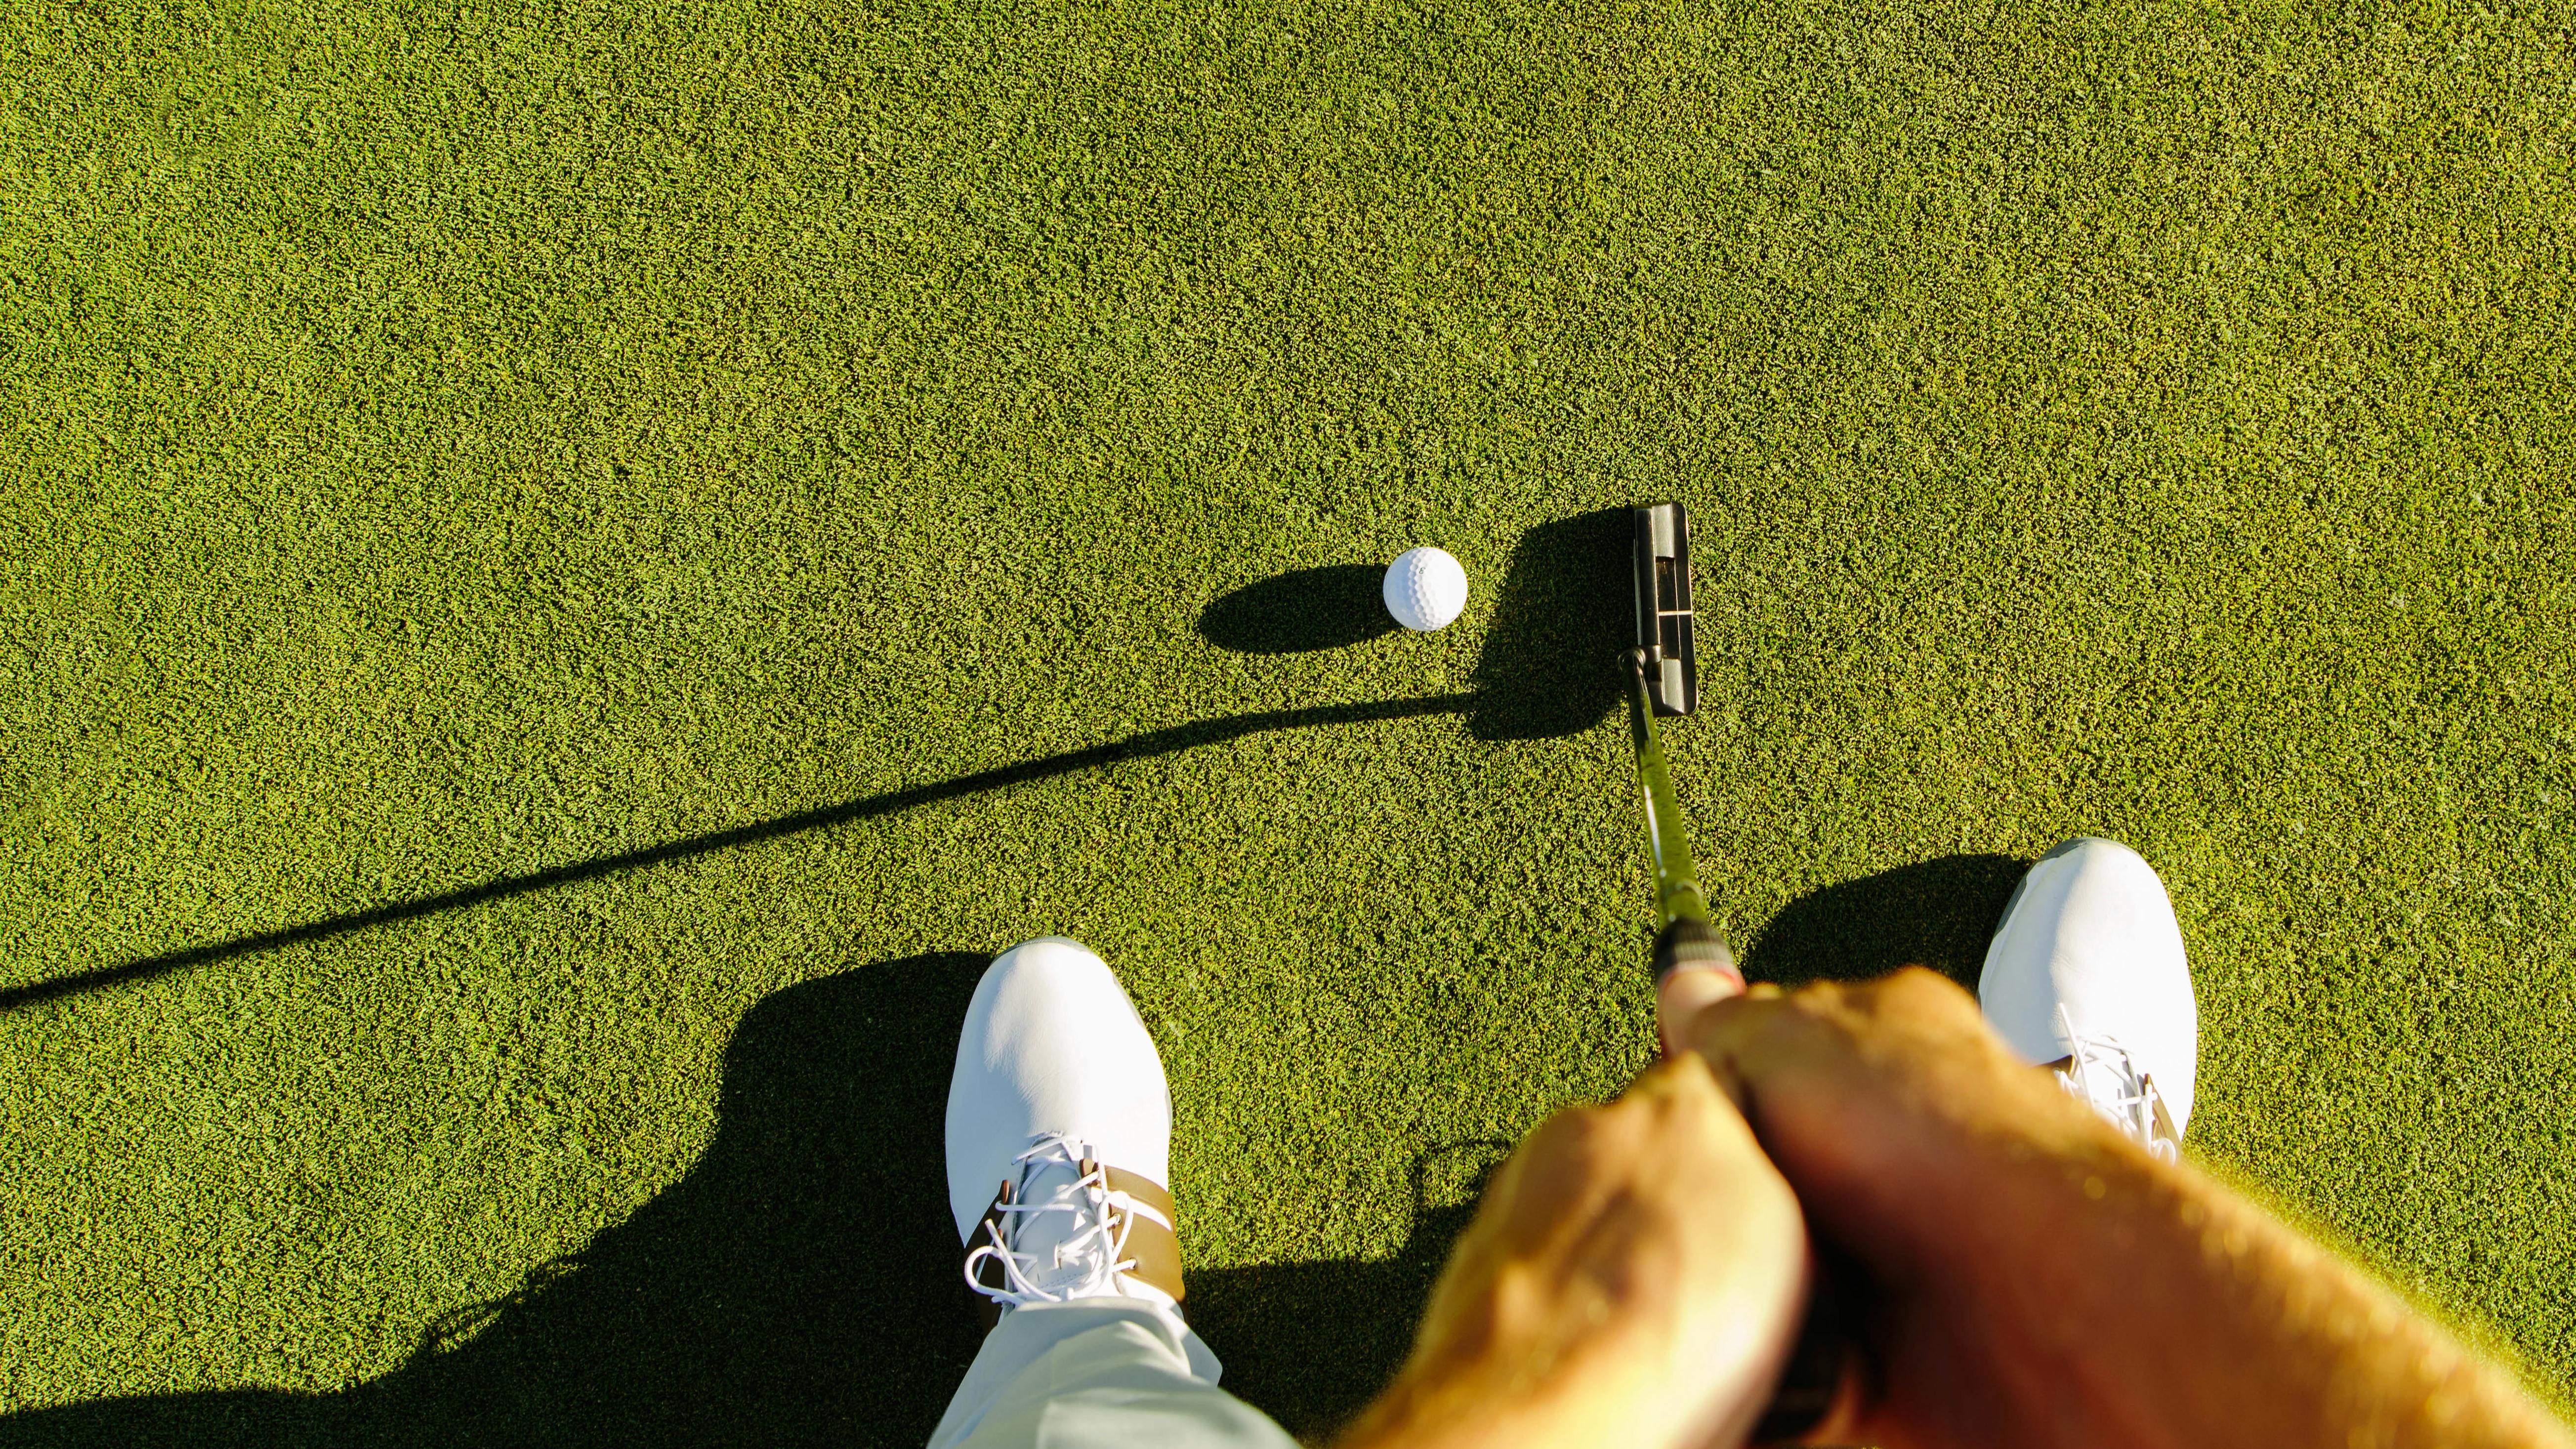 Top down view of a golfer putting a ball into the hole. 